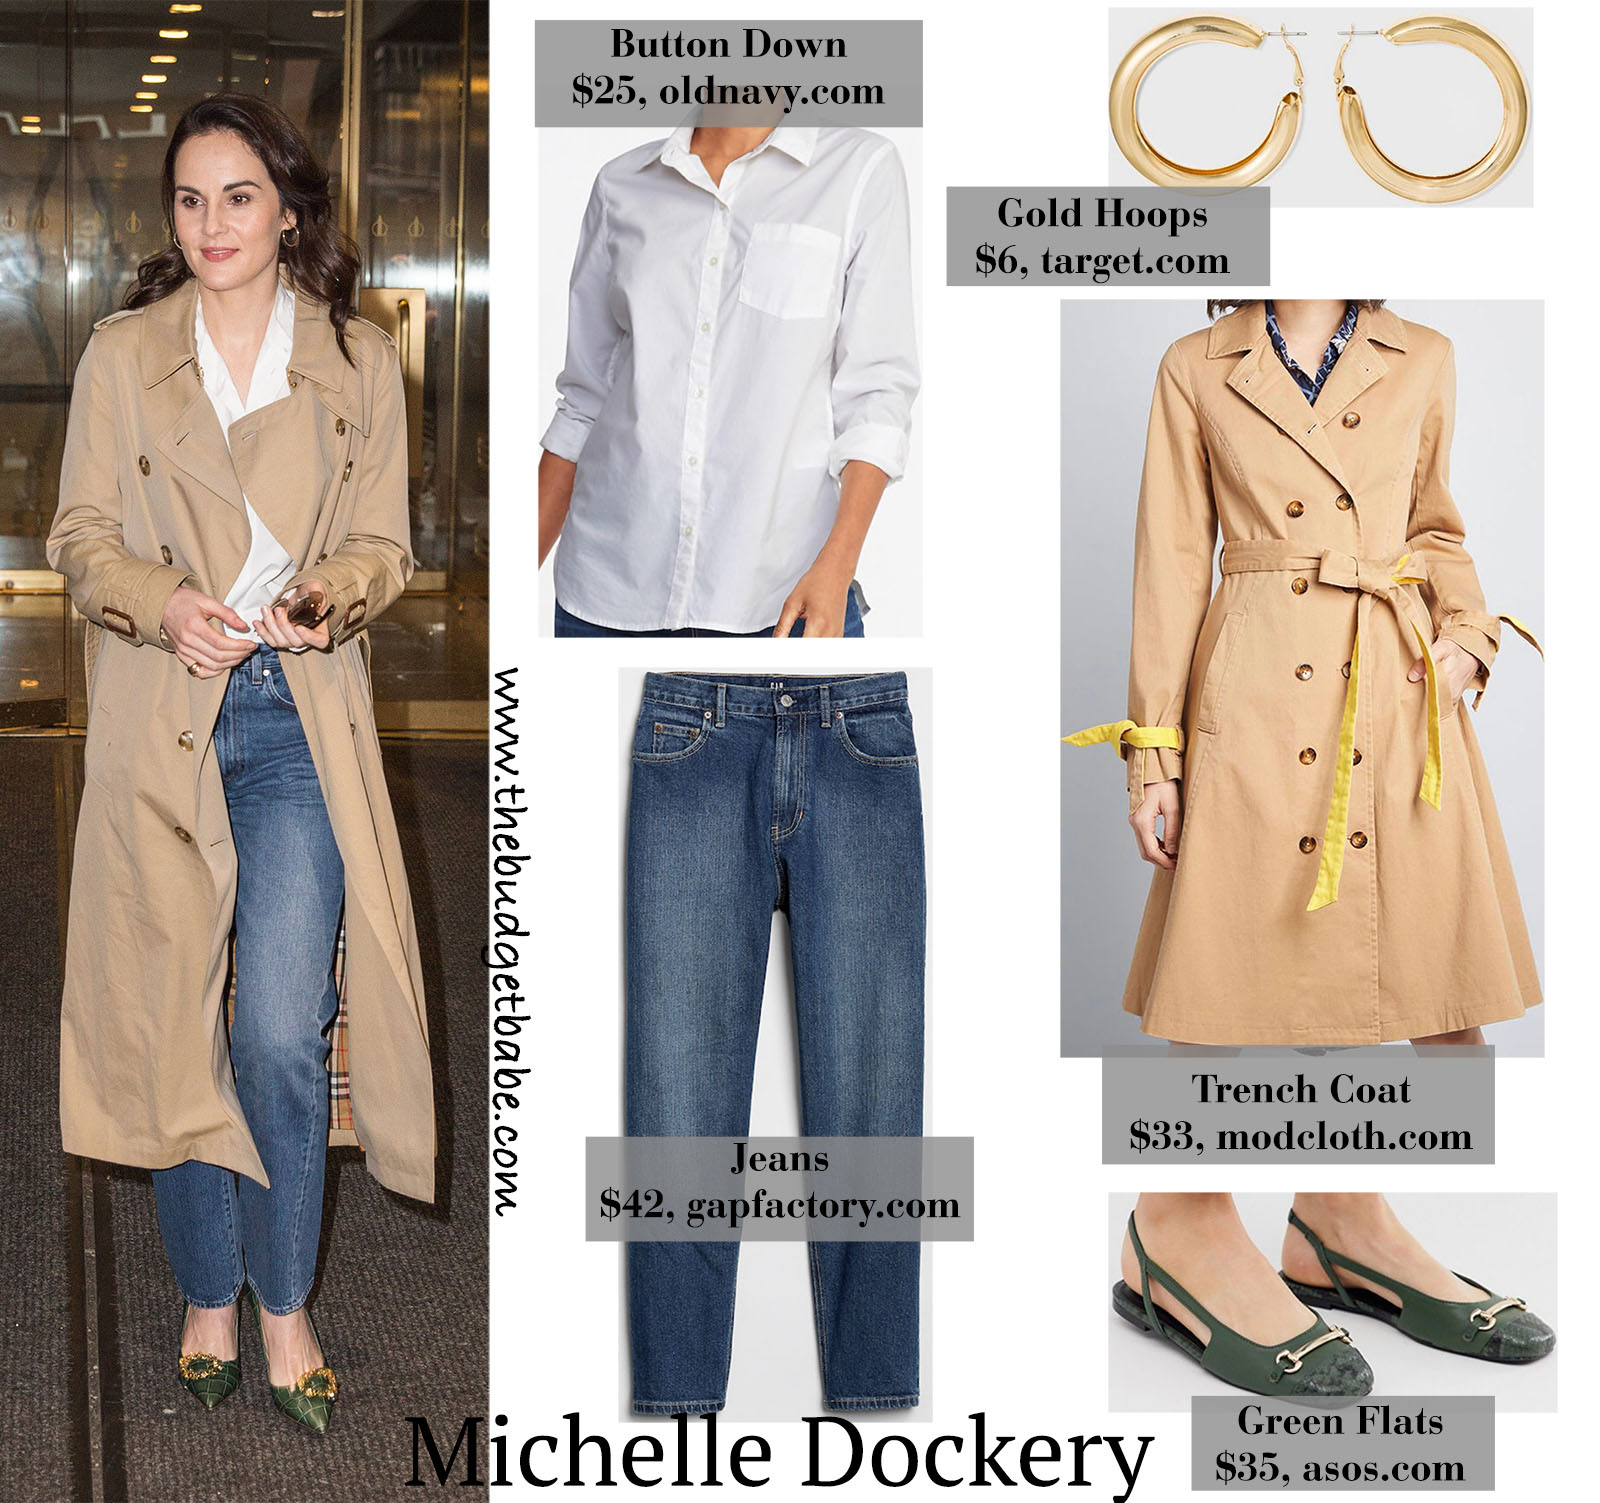 Michelle Dockery looks classic and chic in a long trench coat and green flats!